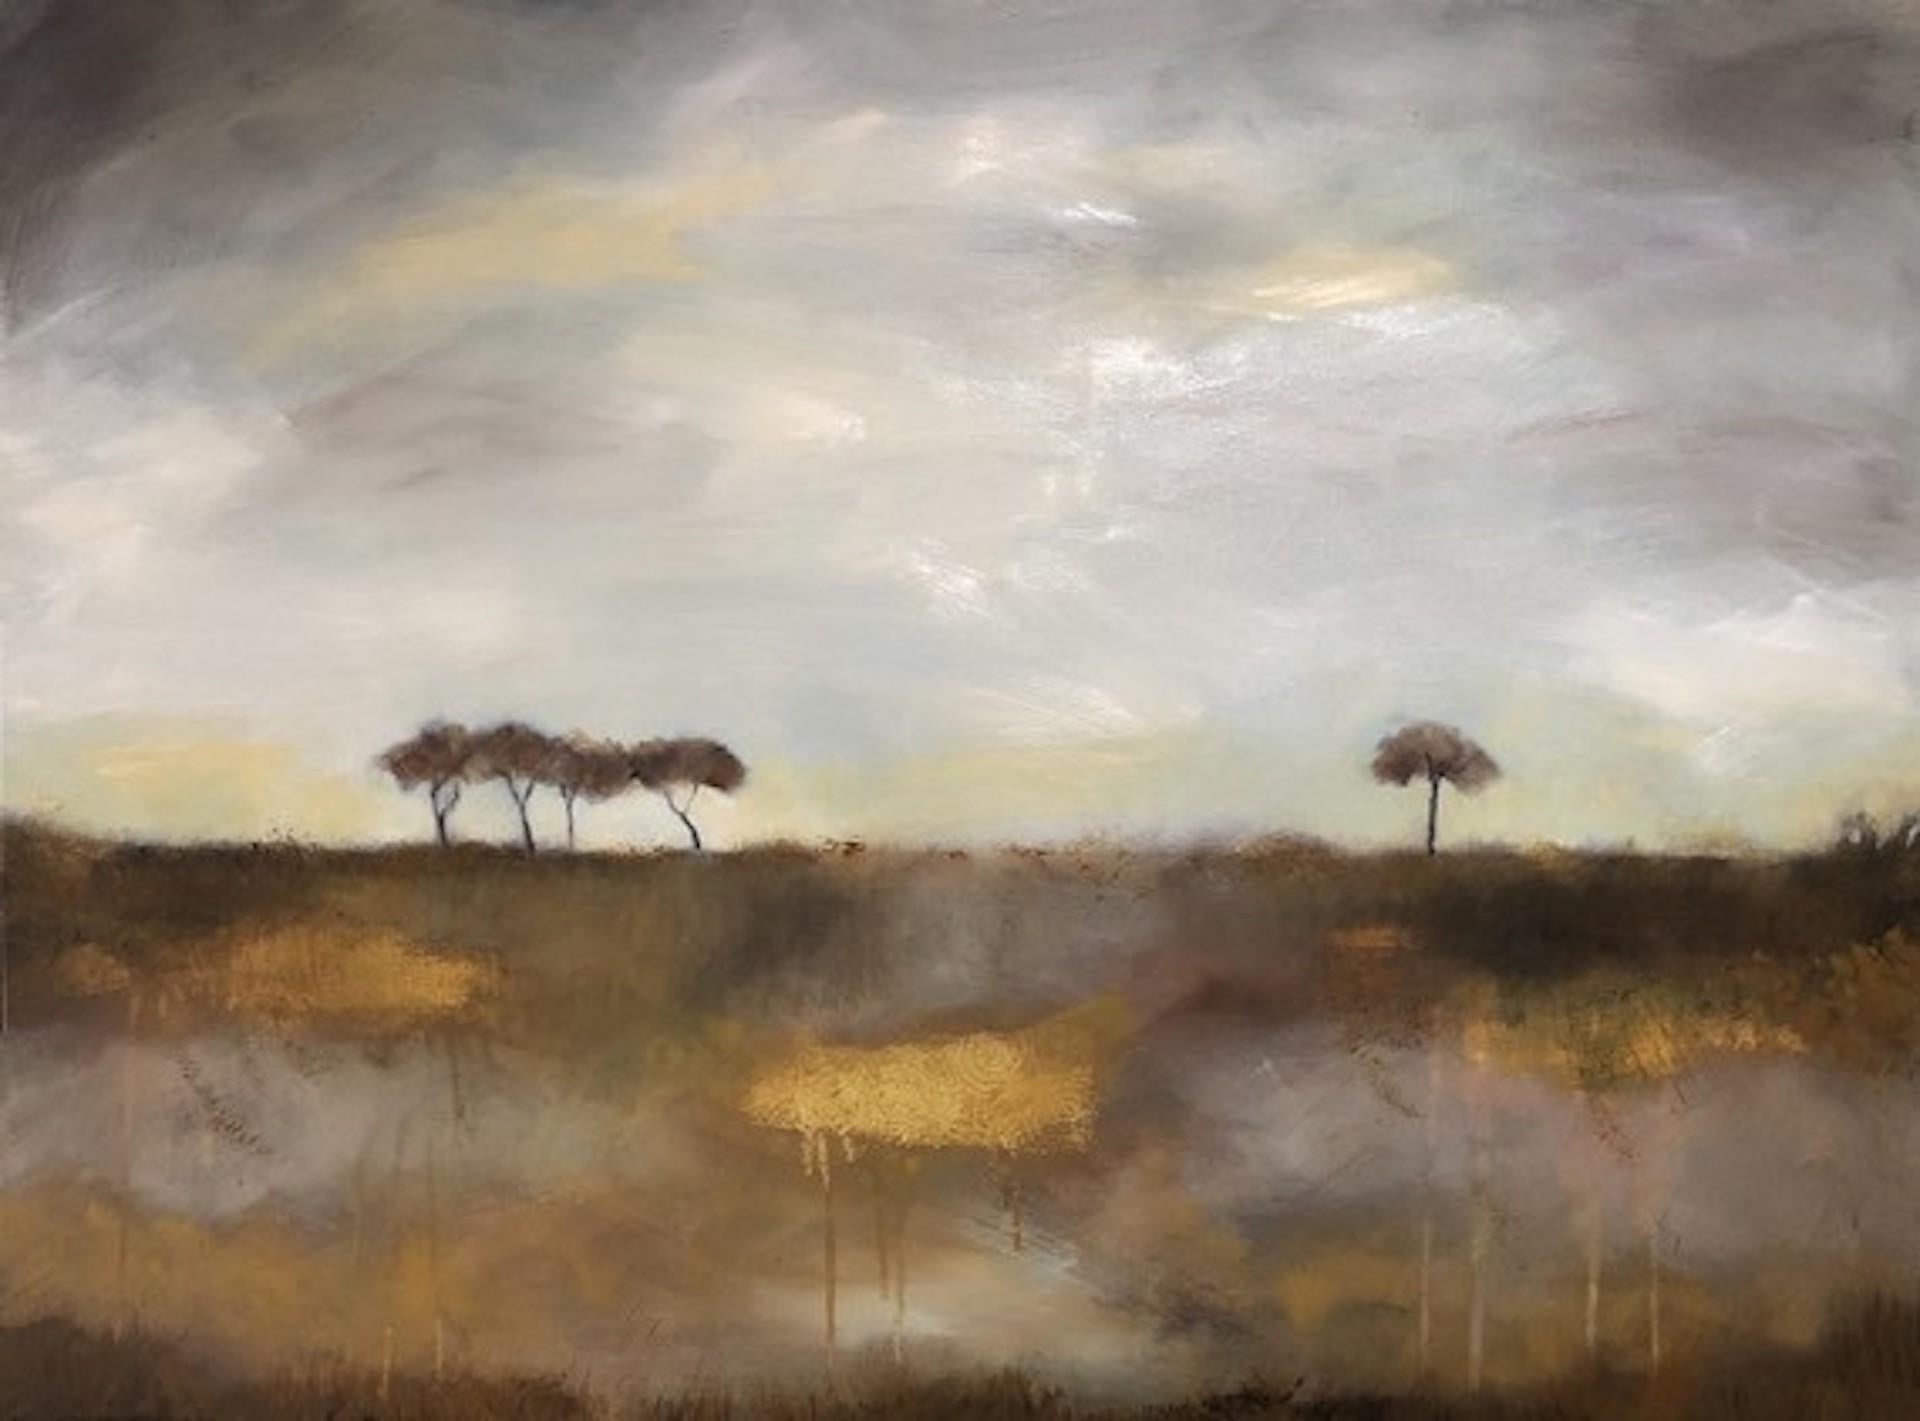 Heartland By Ana Bianchi [2020]
Original
Oil on Canvas
Image size: H:8.138 cm x W:11 cm
Complete Size of Unframed Work: H:76 cm x W:102 cm x D:3cm
Frame Size: H:80 cm x W:106 cm x D:5cm
Sold Framed
Please note that insitu images are purely an